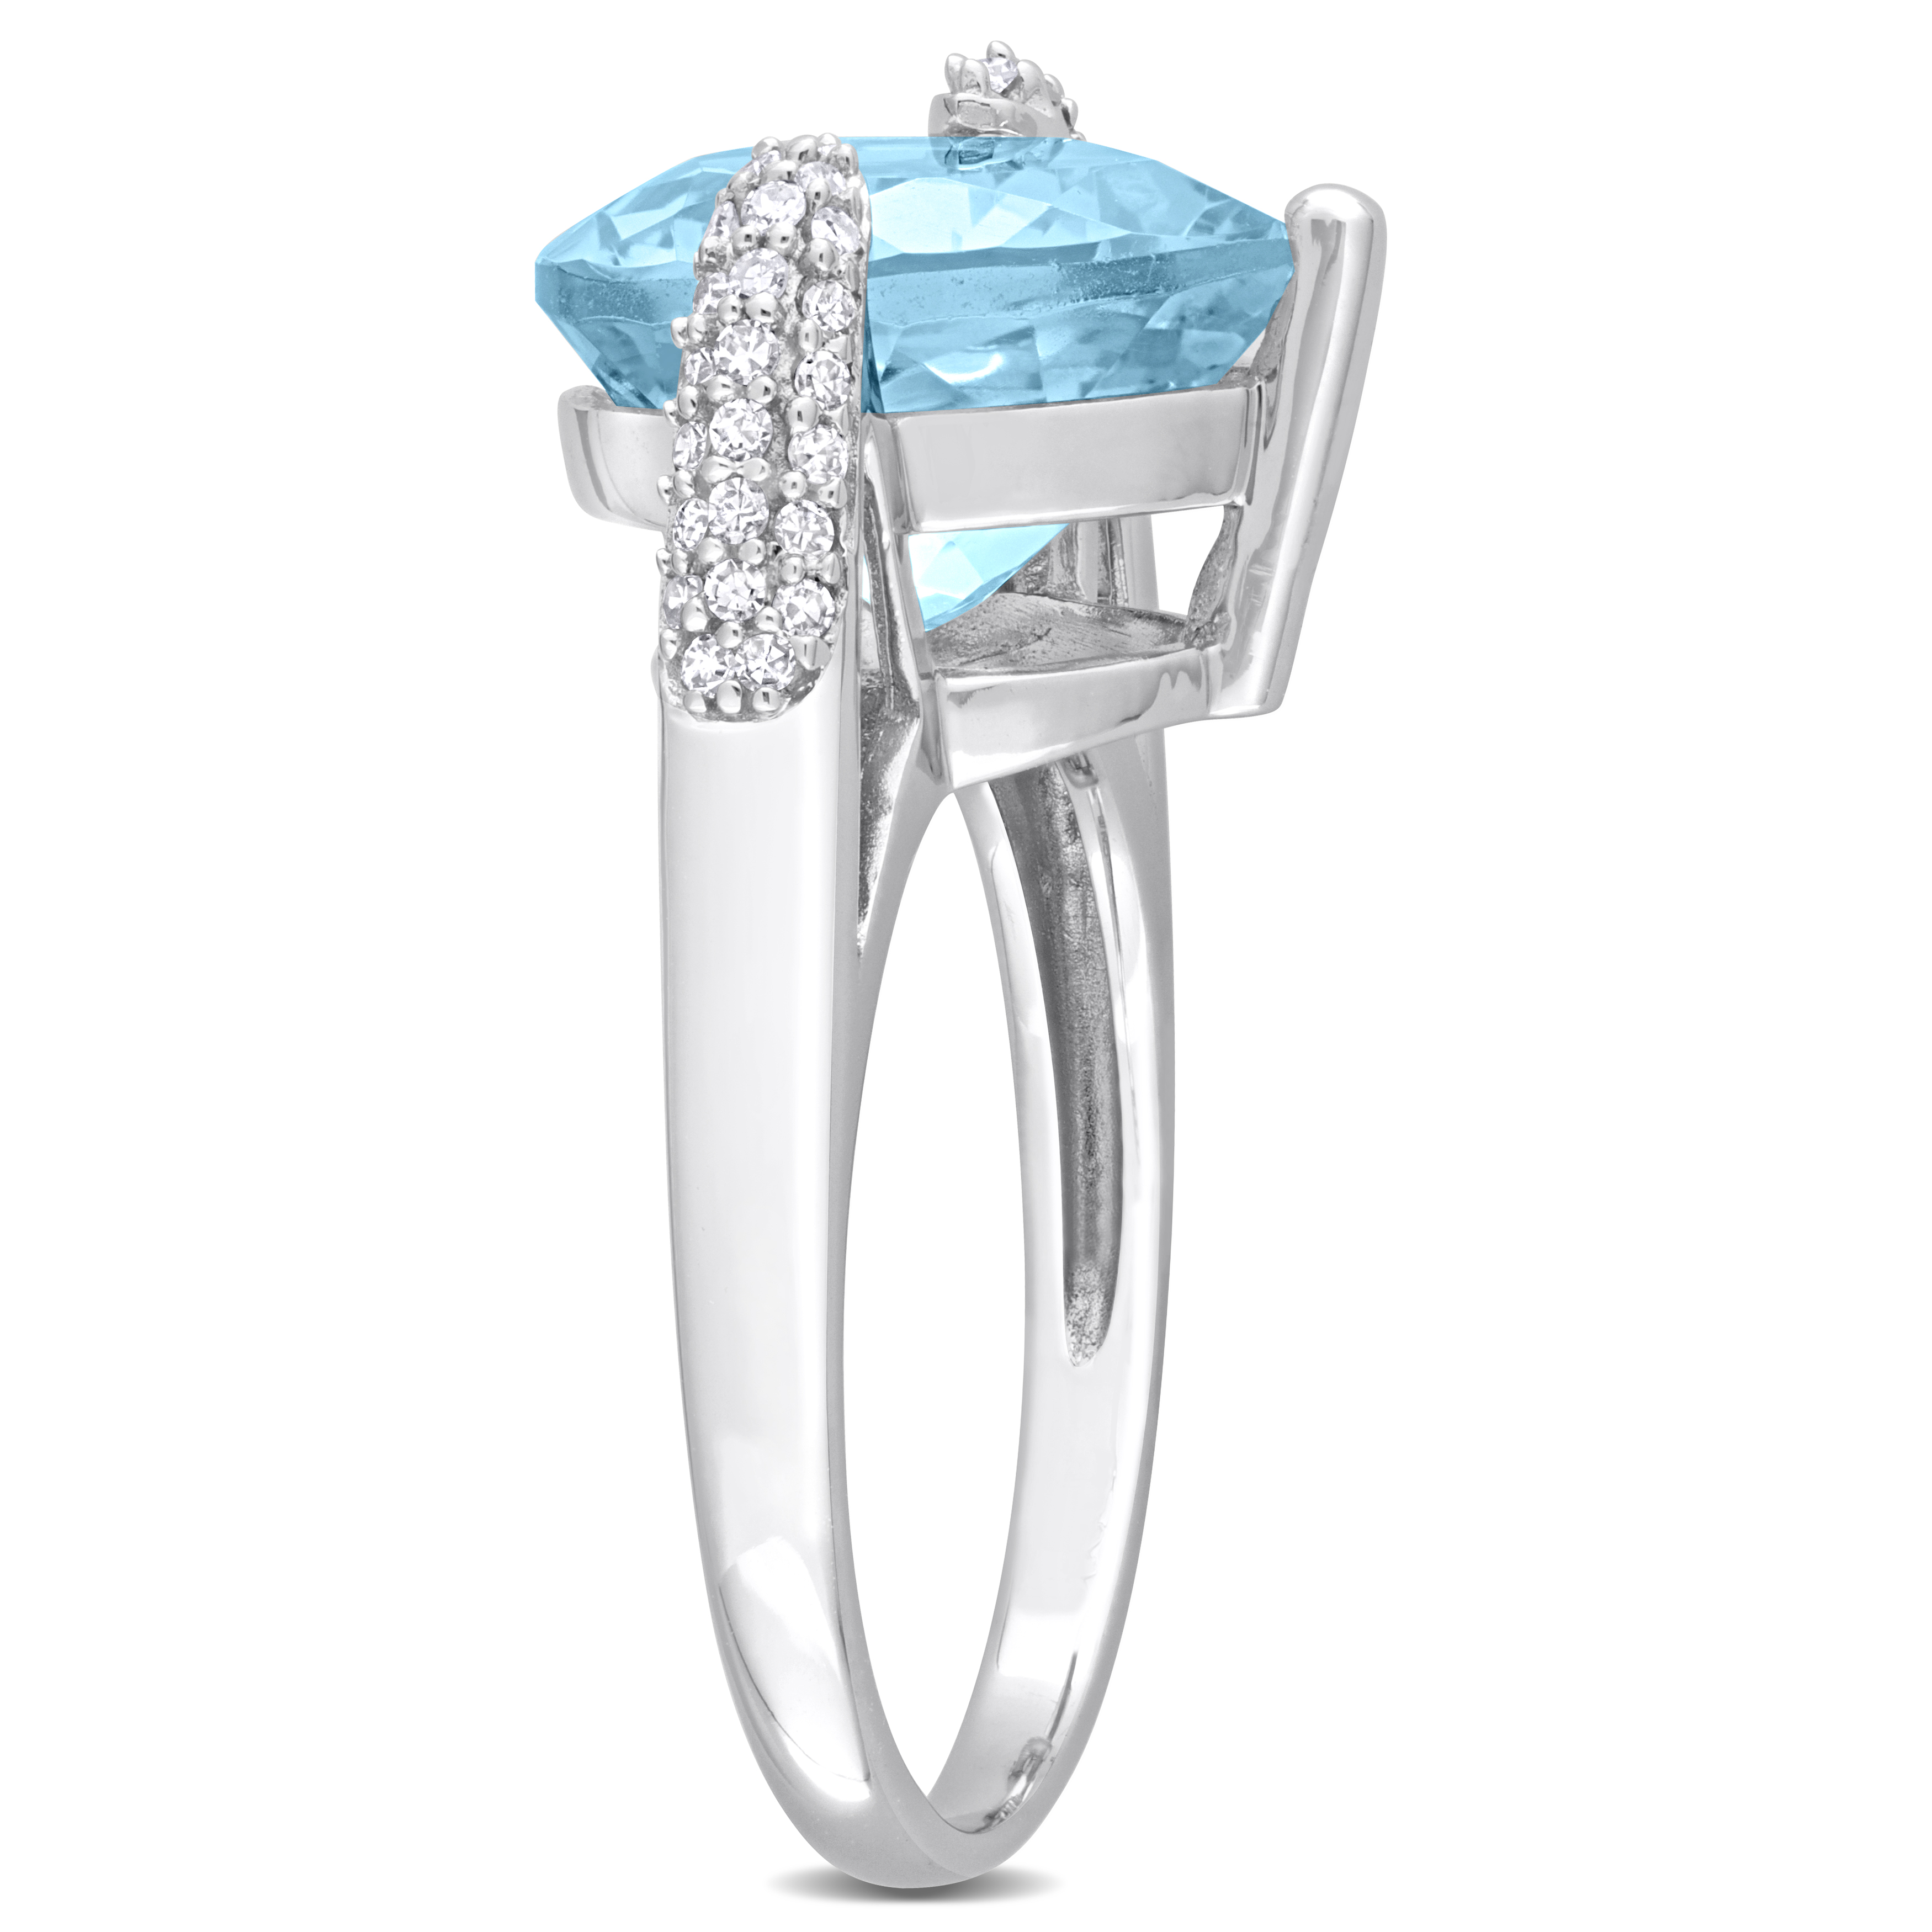 7 CT TGW Heart-Cut Sky Blue Topaz and 1/5ct TDW Diamond Ring in 14k White Gold